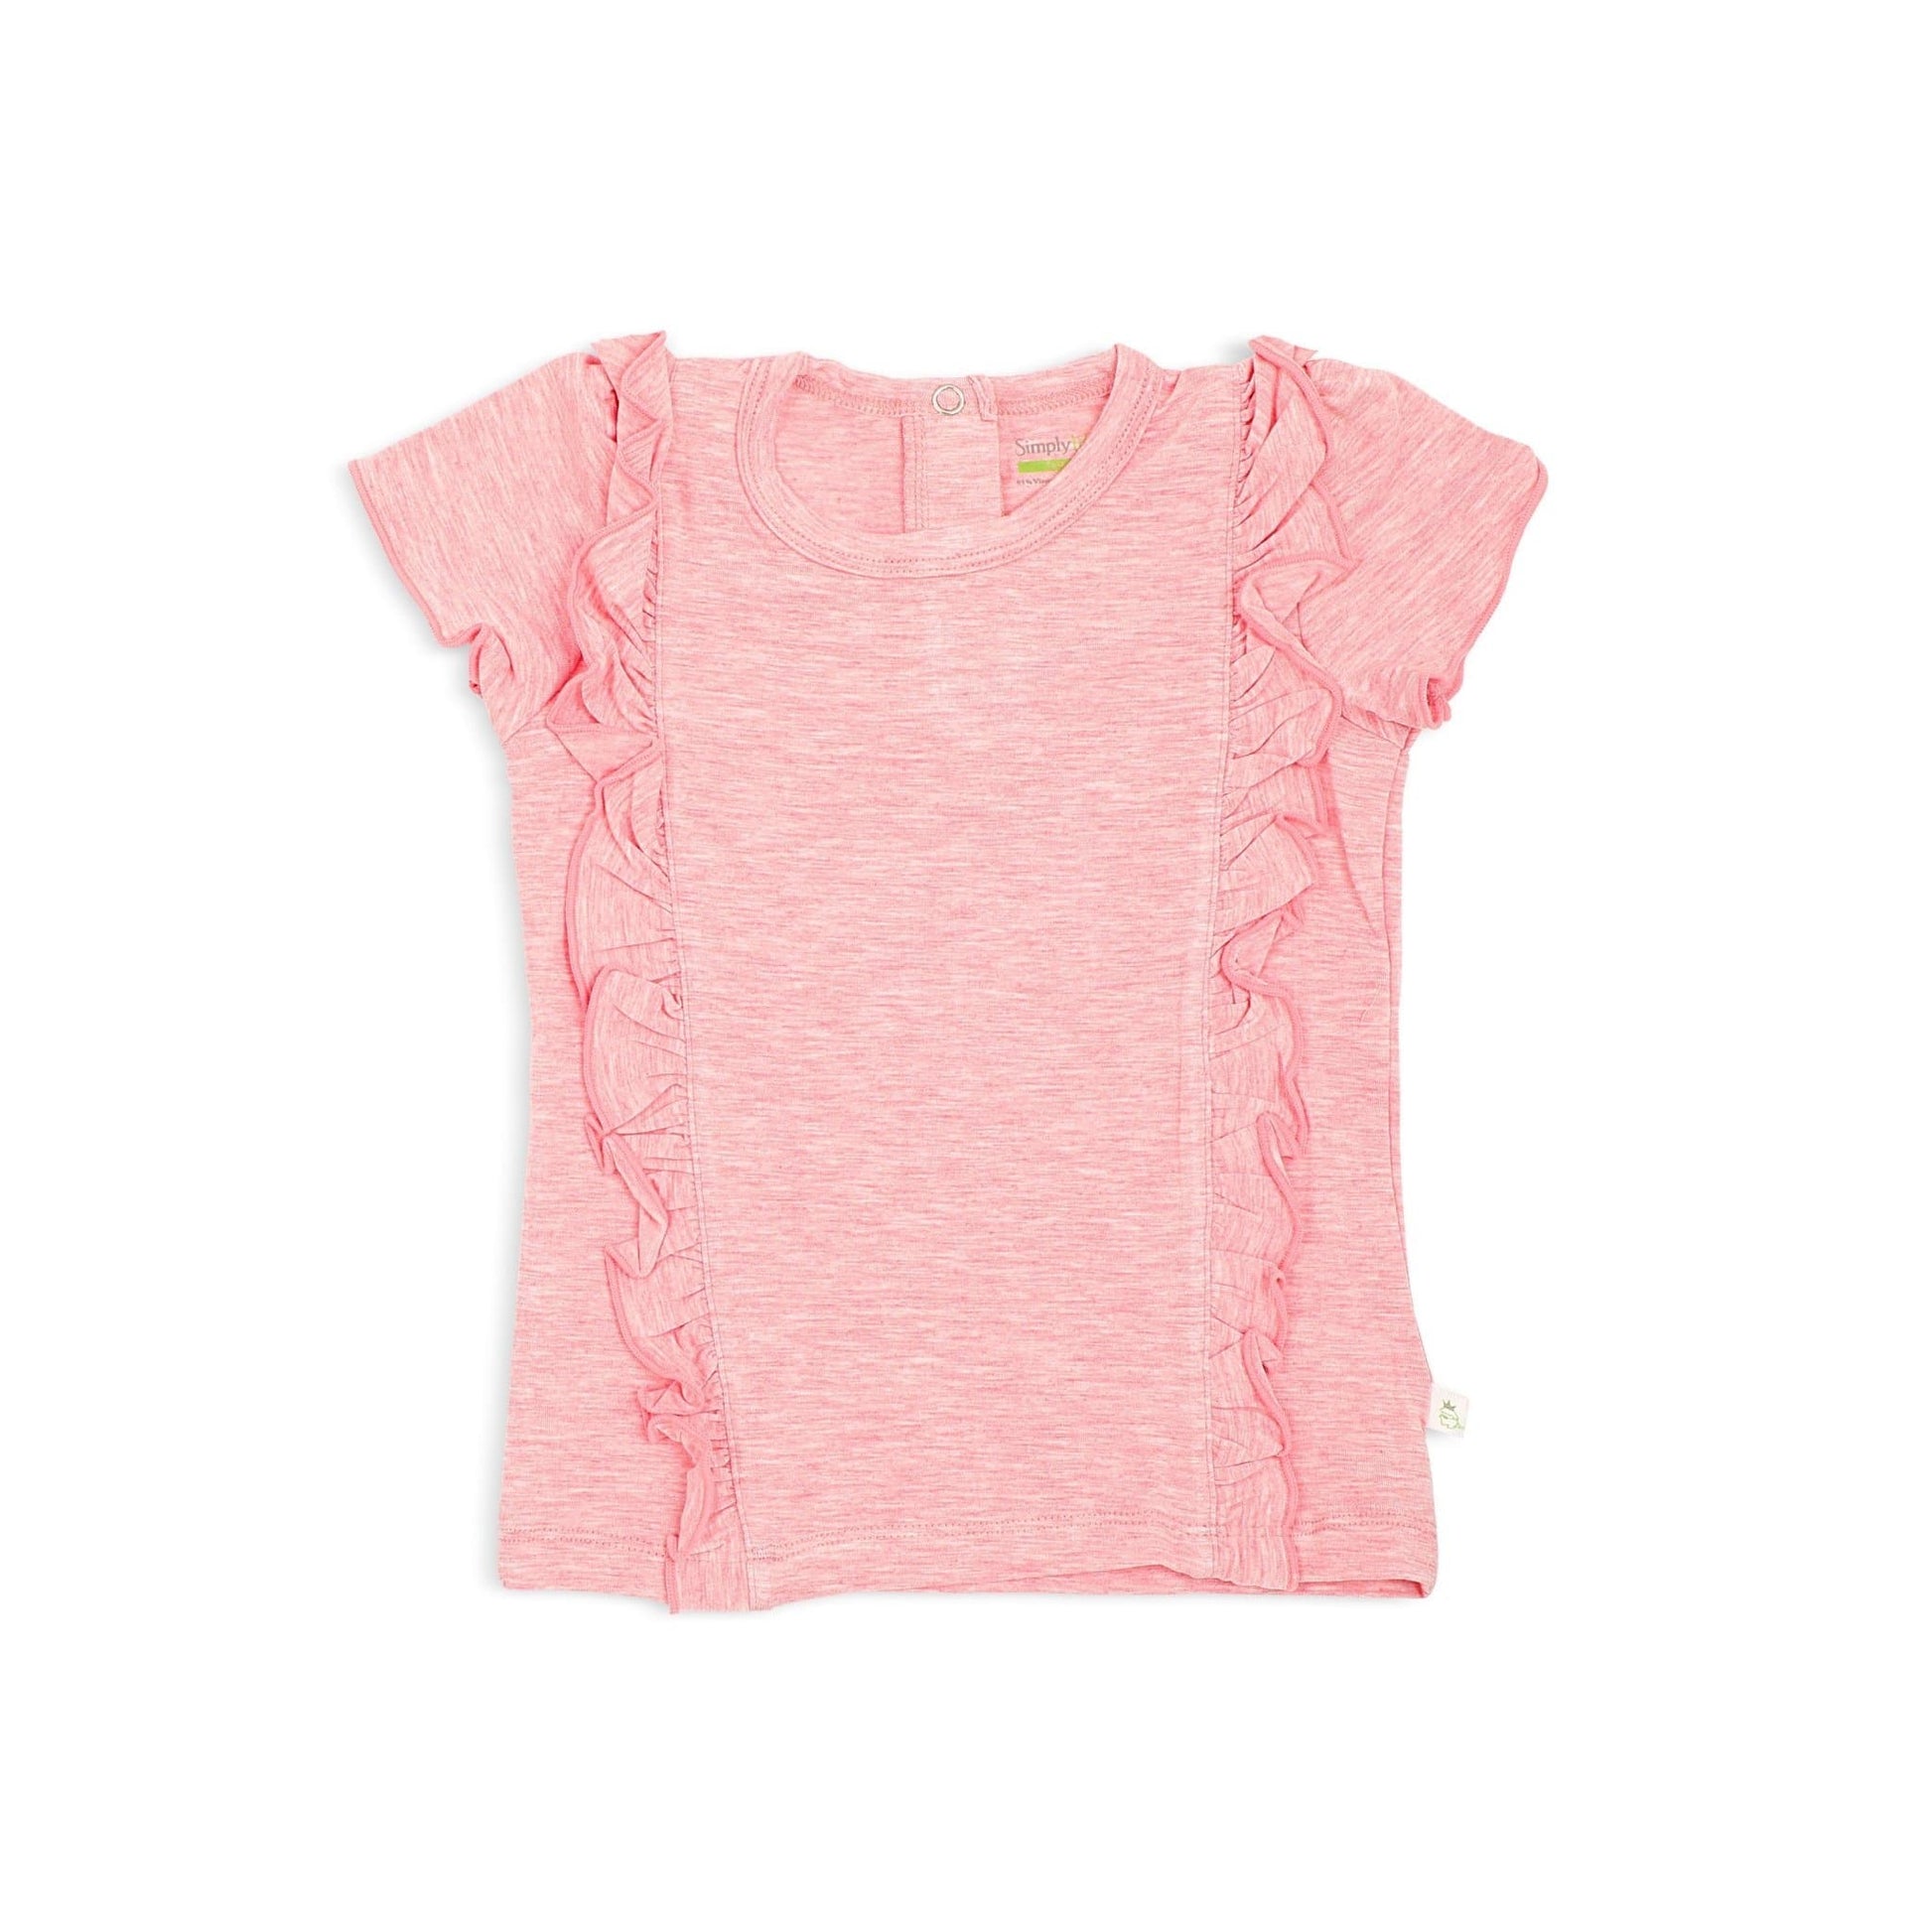 Girls' Frilled Tee by simplylifebaby